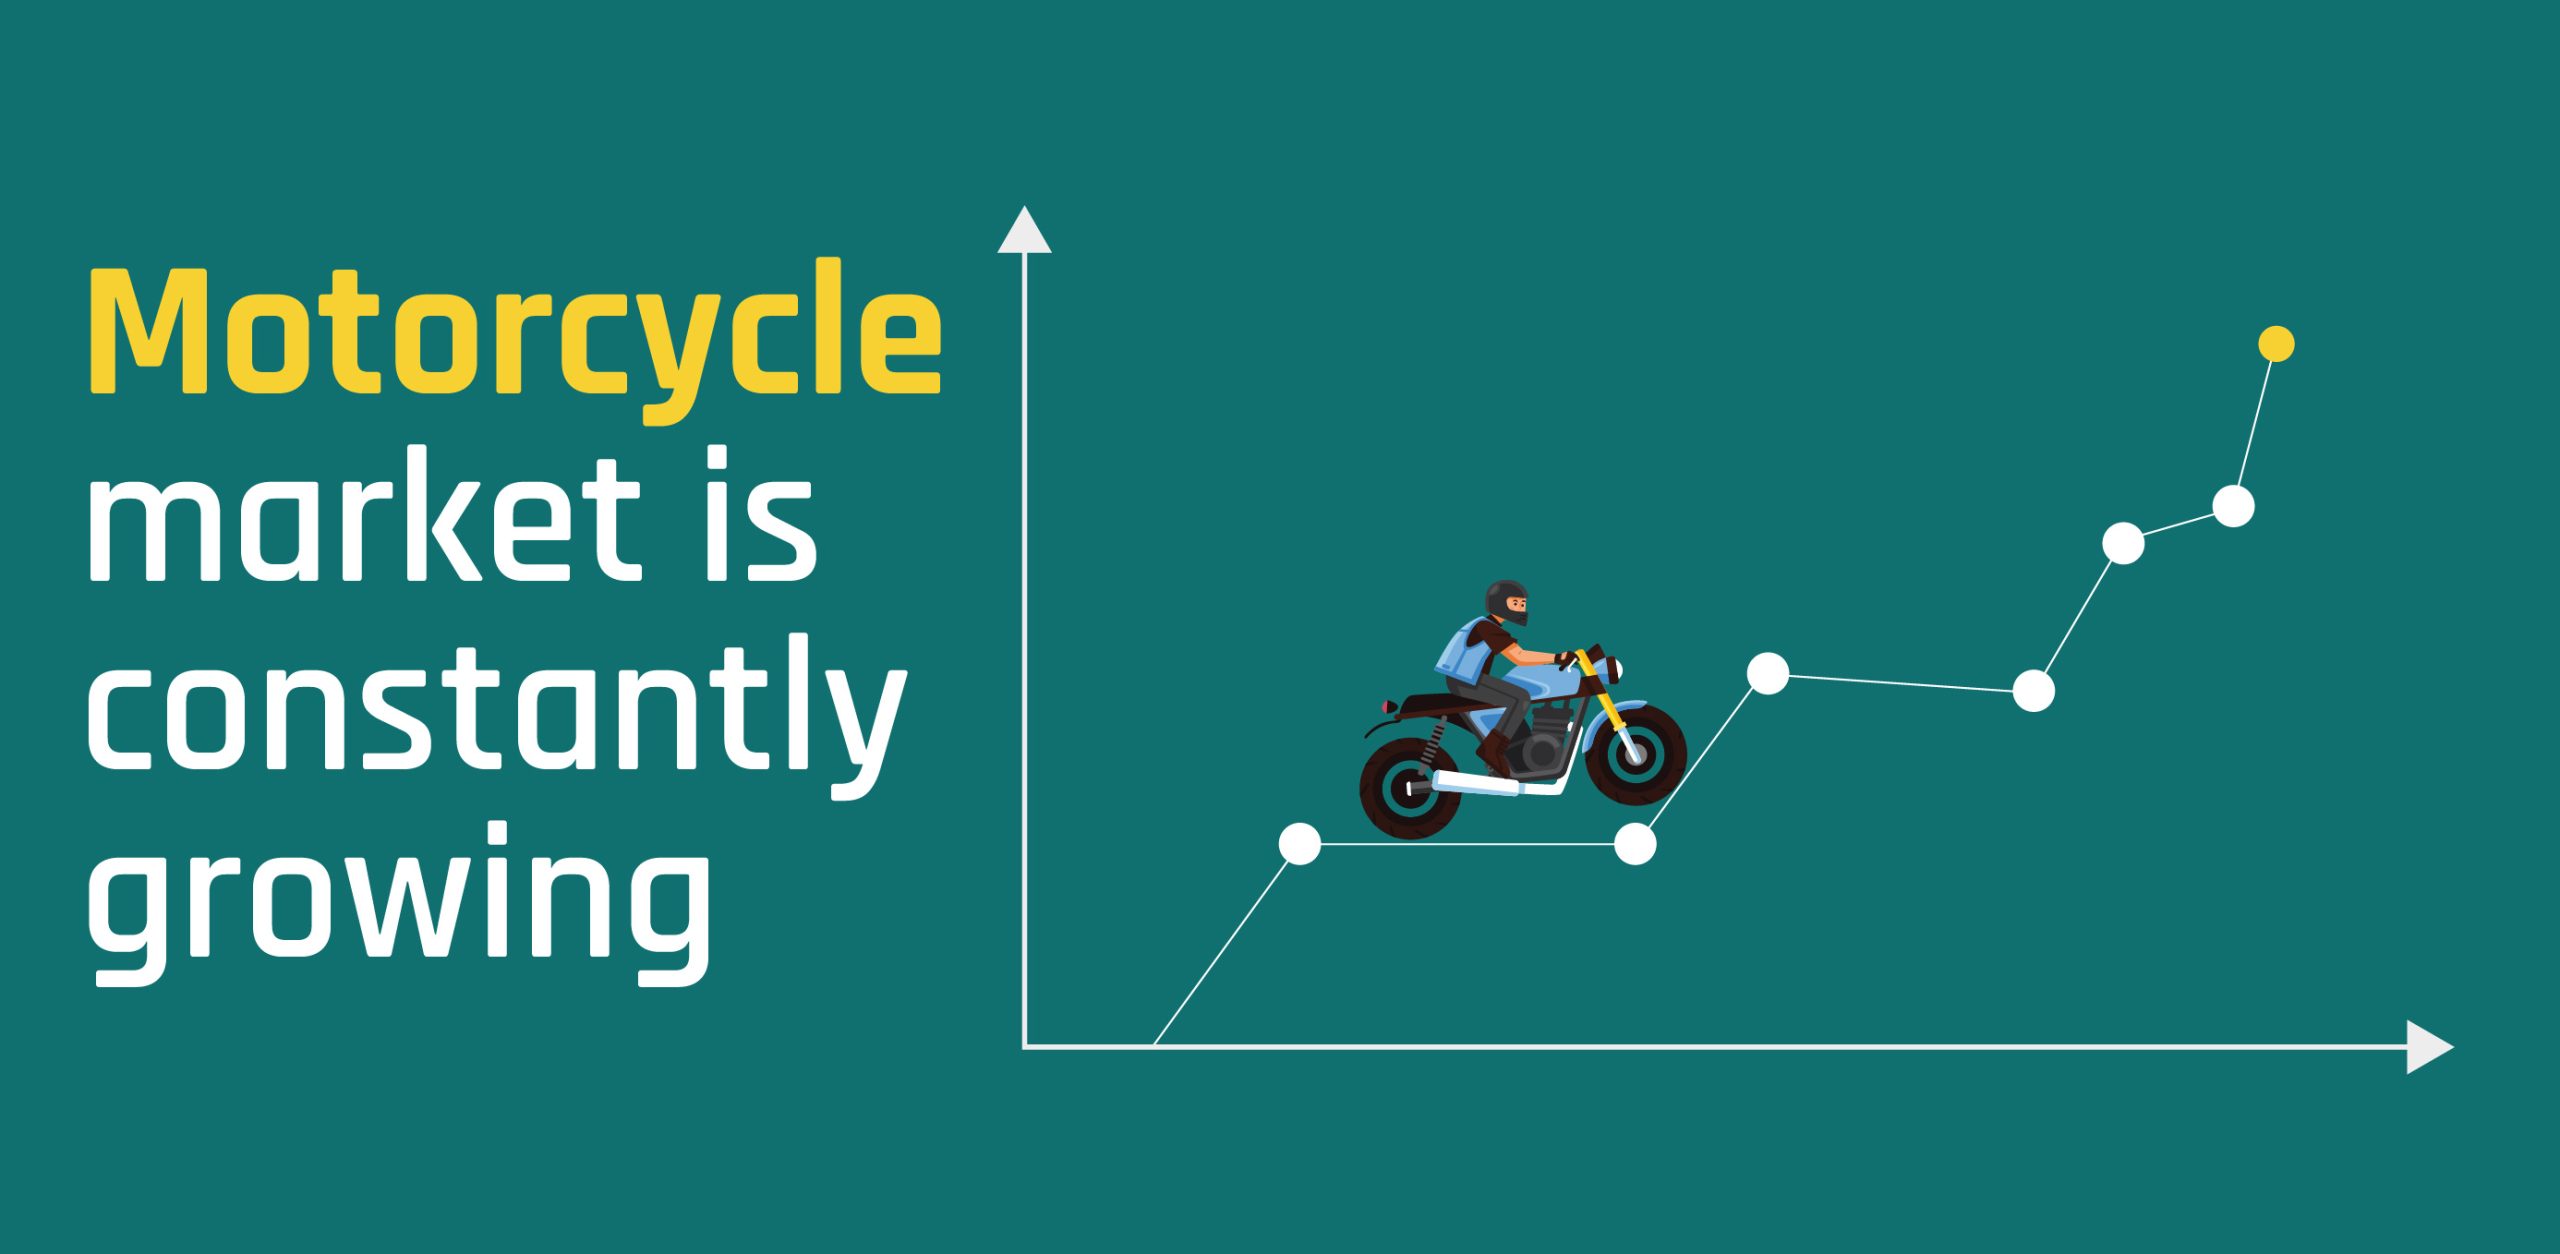 How Can the Growing Motorcycle Market Provide Opportunities to Lubricants Manufacturers